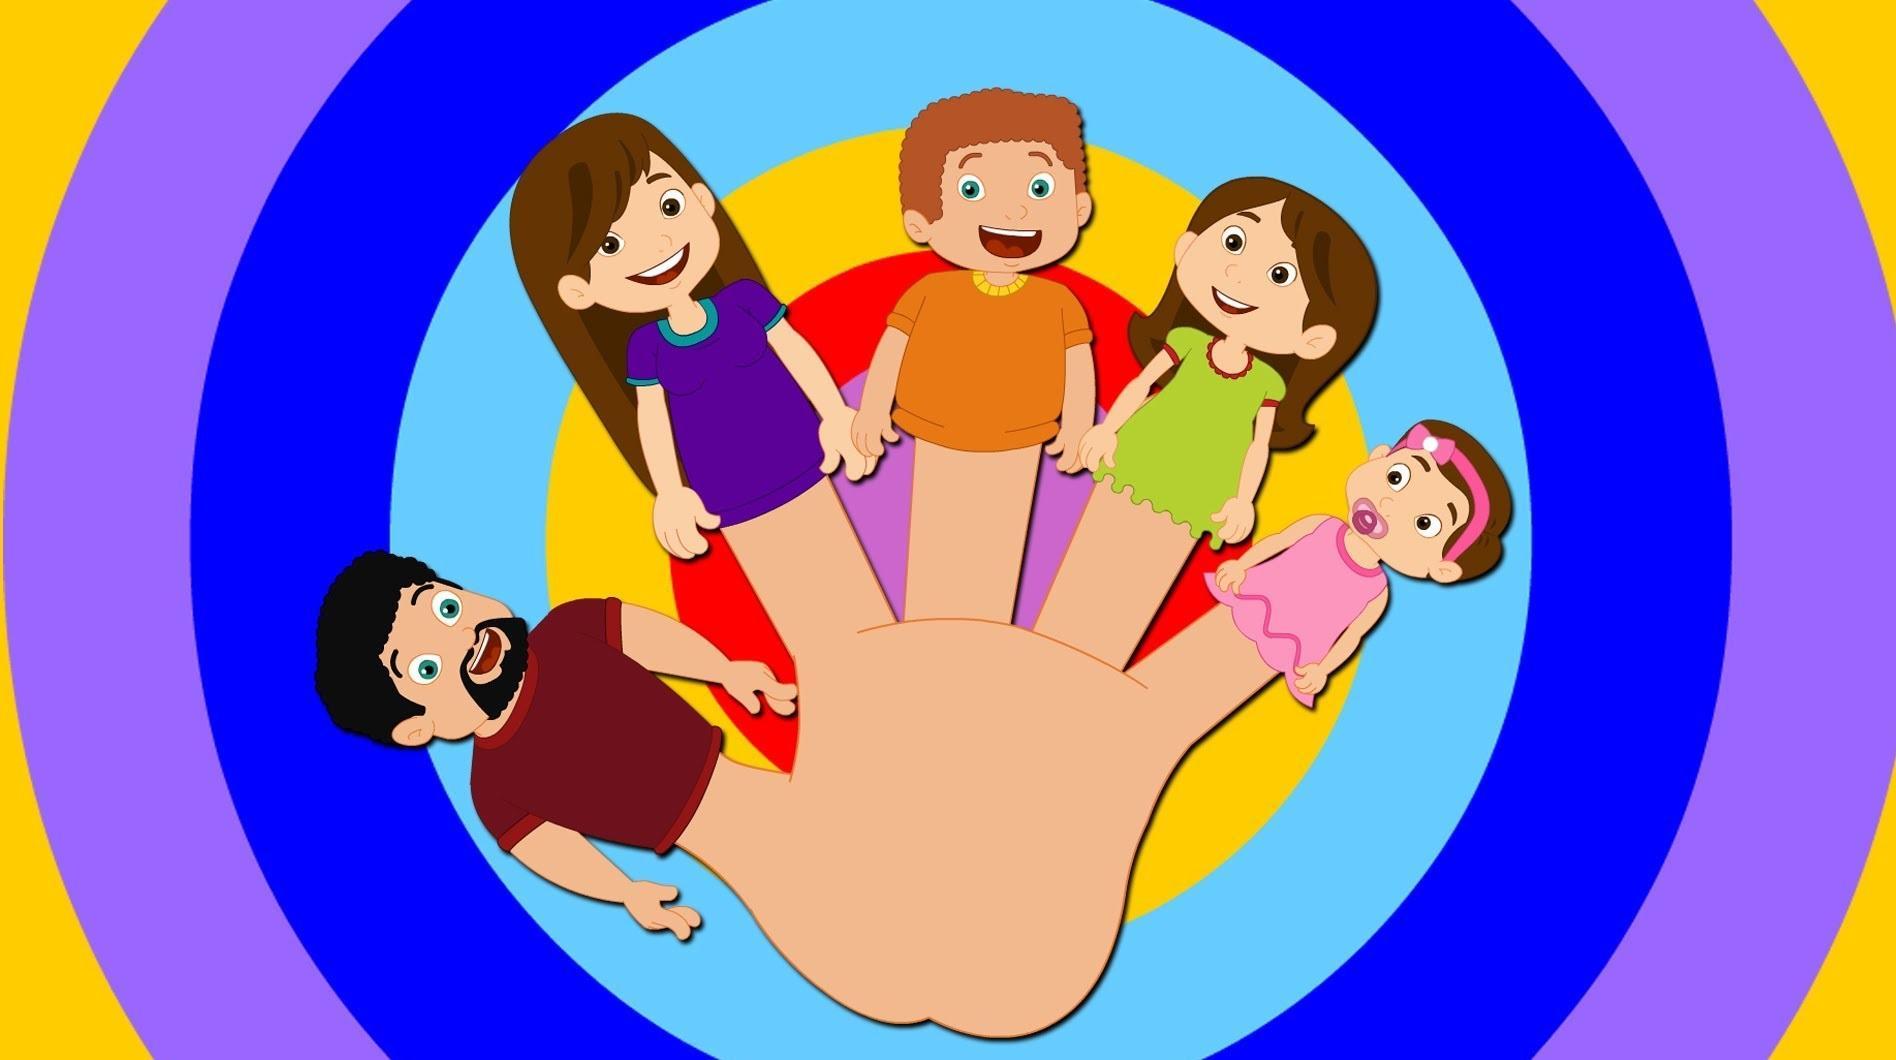 The Finger Family Song  Offline video for Android APK 